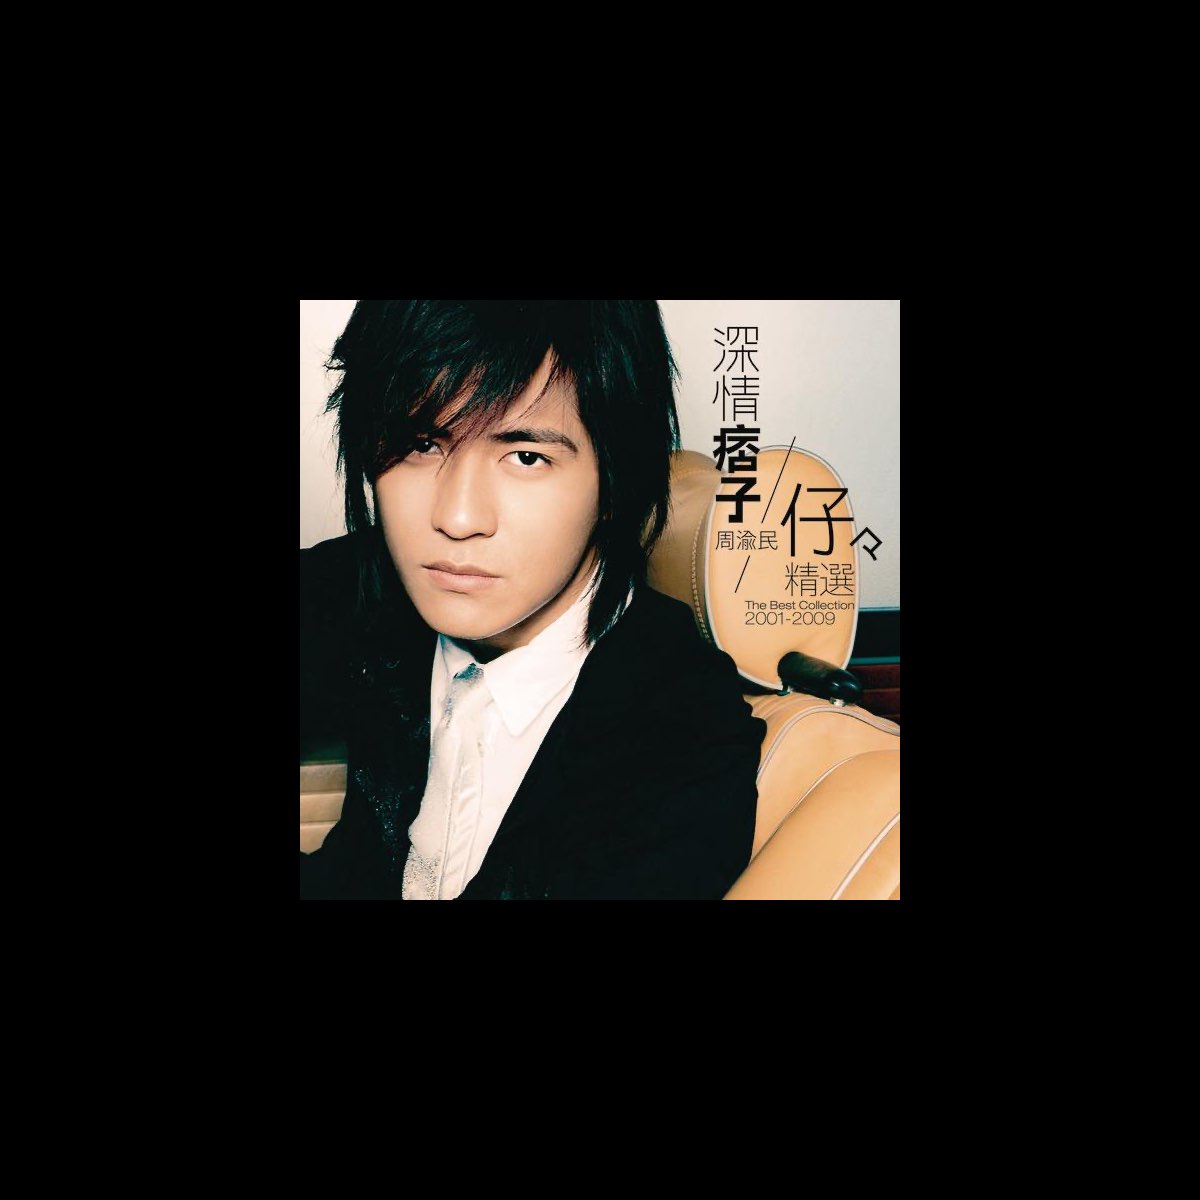 ‎Vic Chou: The Best Collection 2001-2009 - Album by Vic Chou - Apple Music